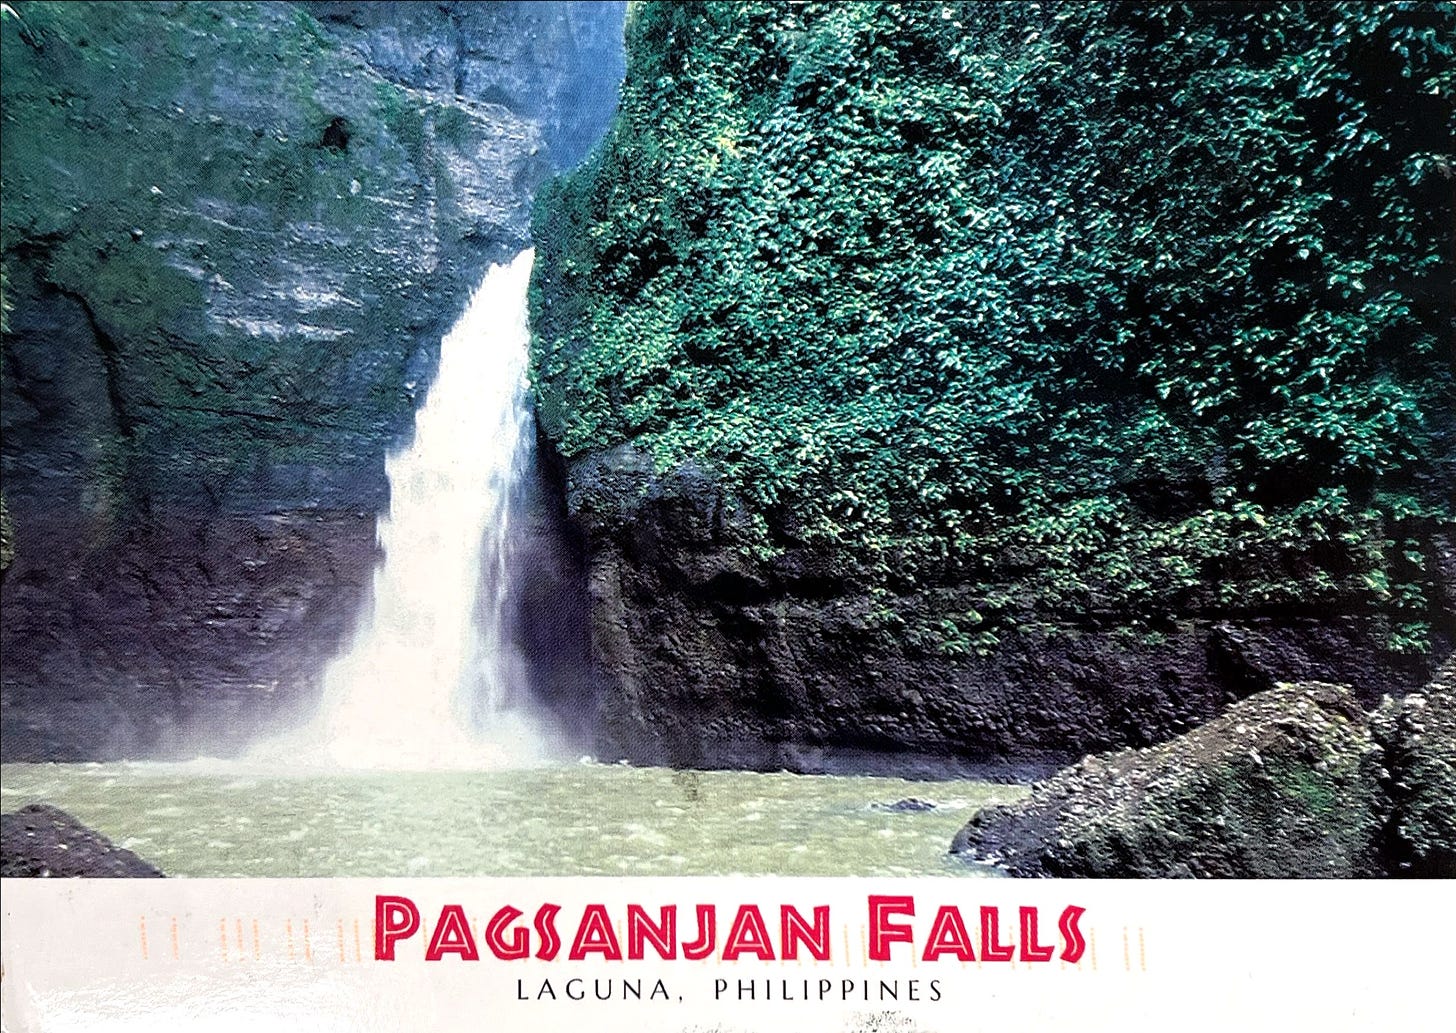 Photo of Pagsanjan Falls, in Laguna, Philippines, on a postcard.